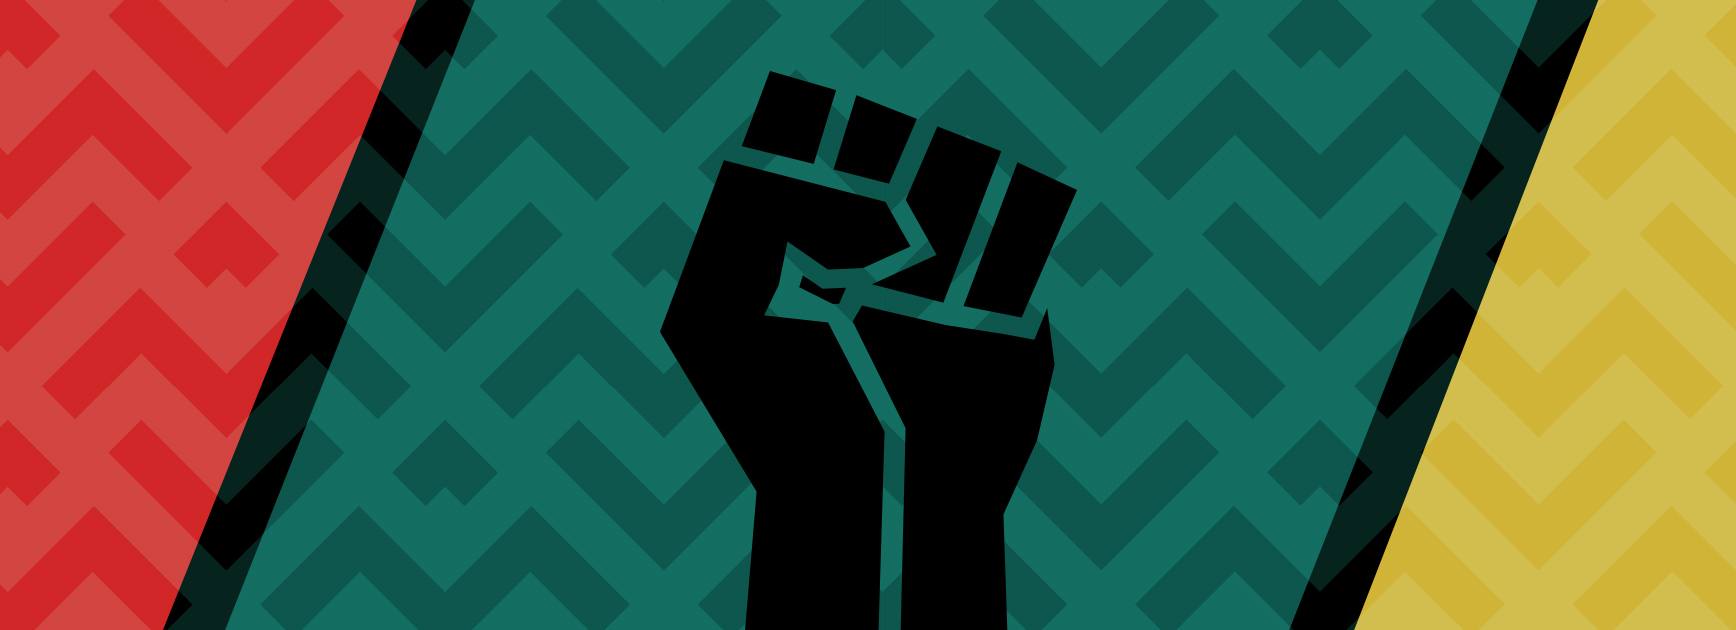 Raised fist over green, red, gold texture